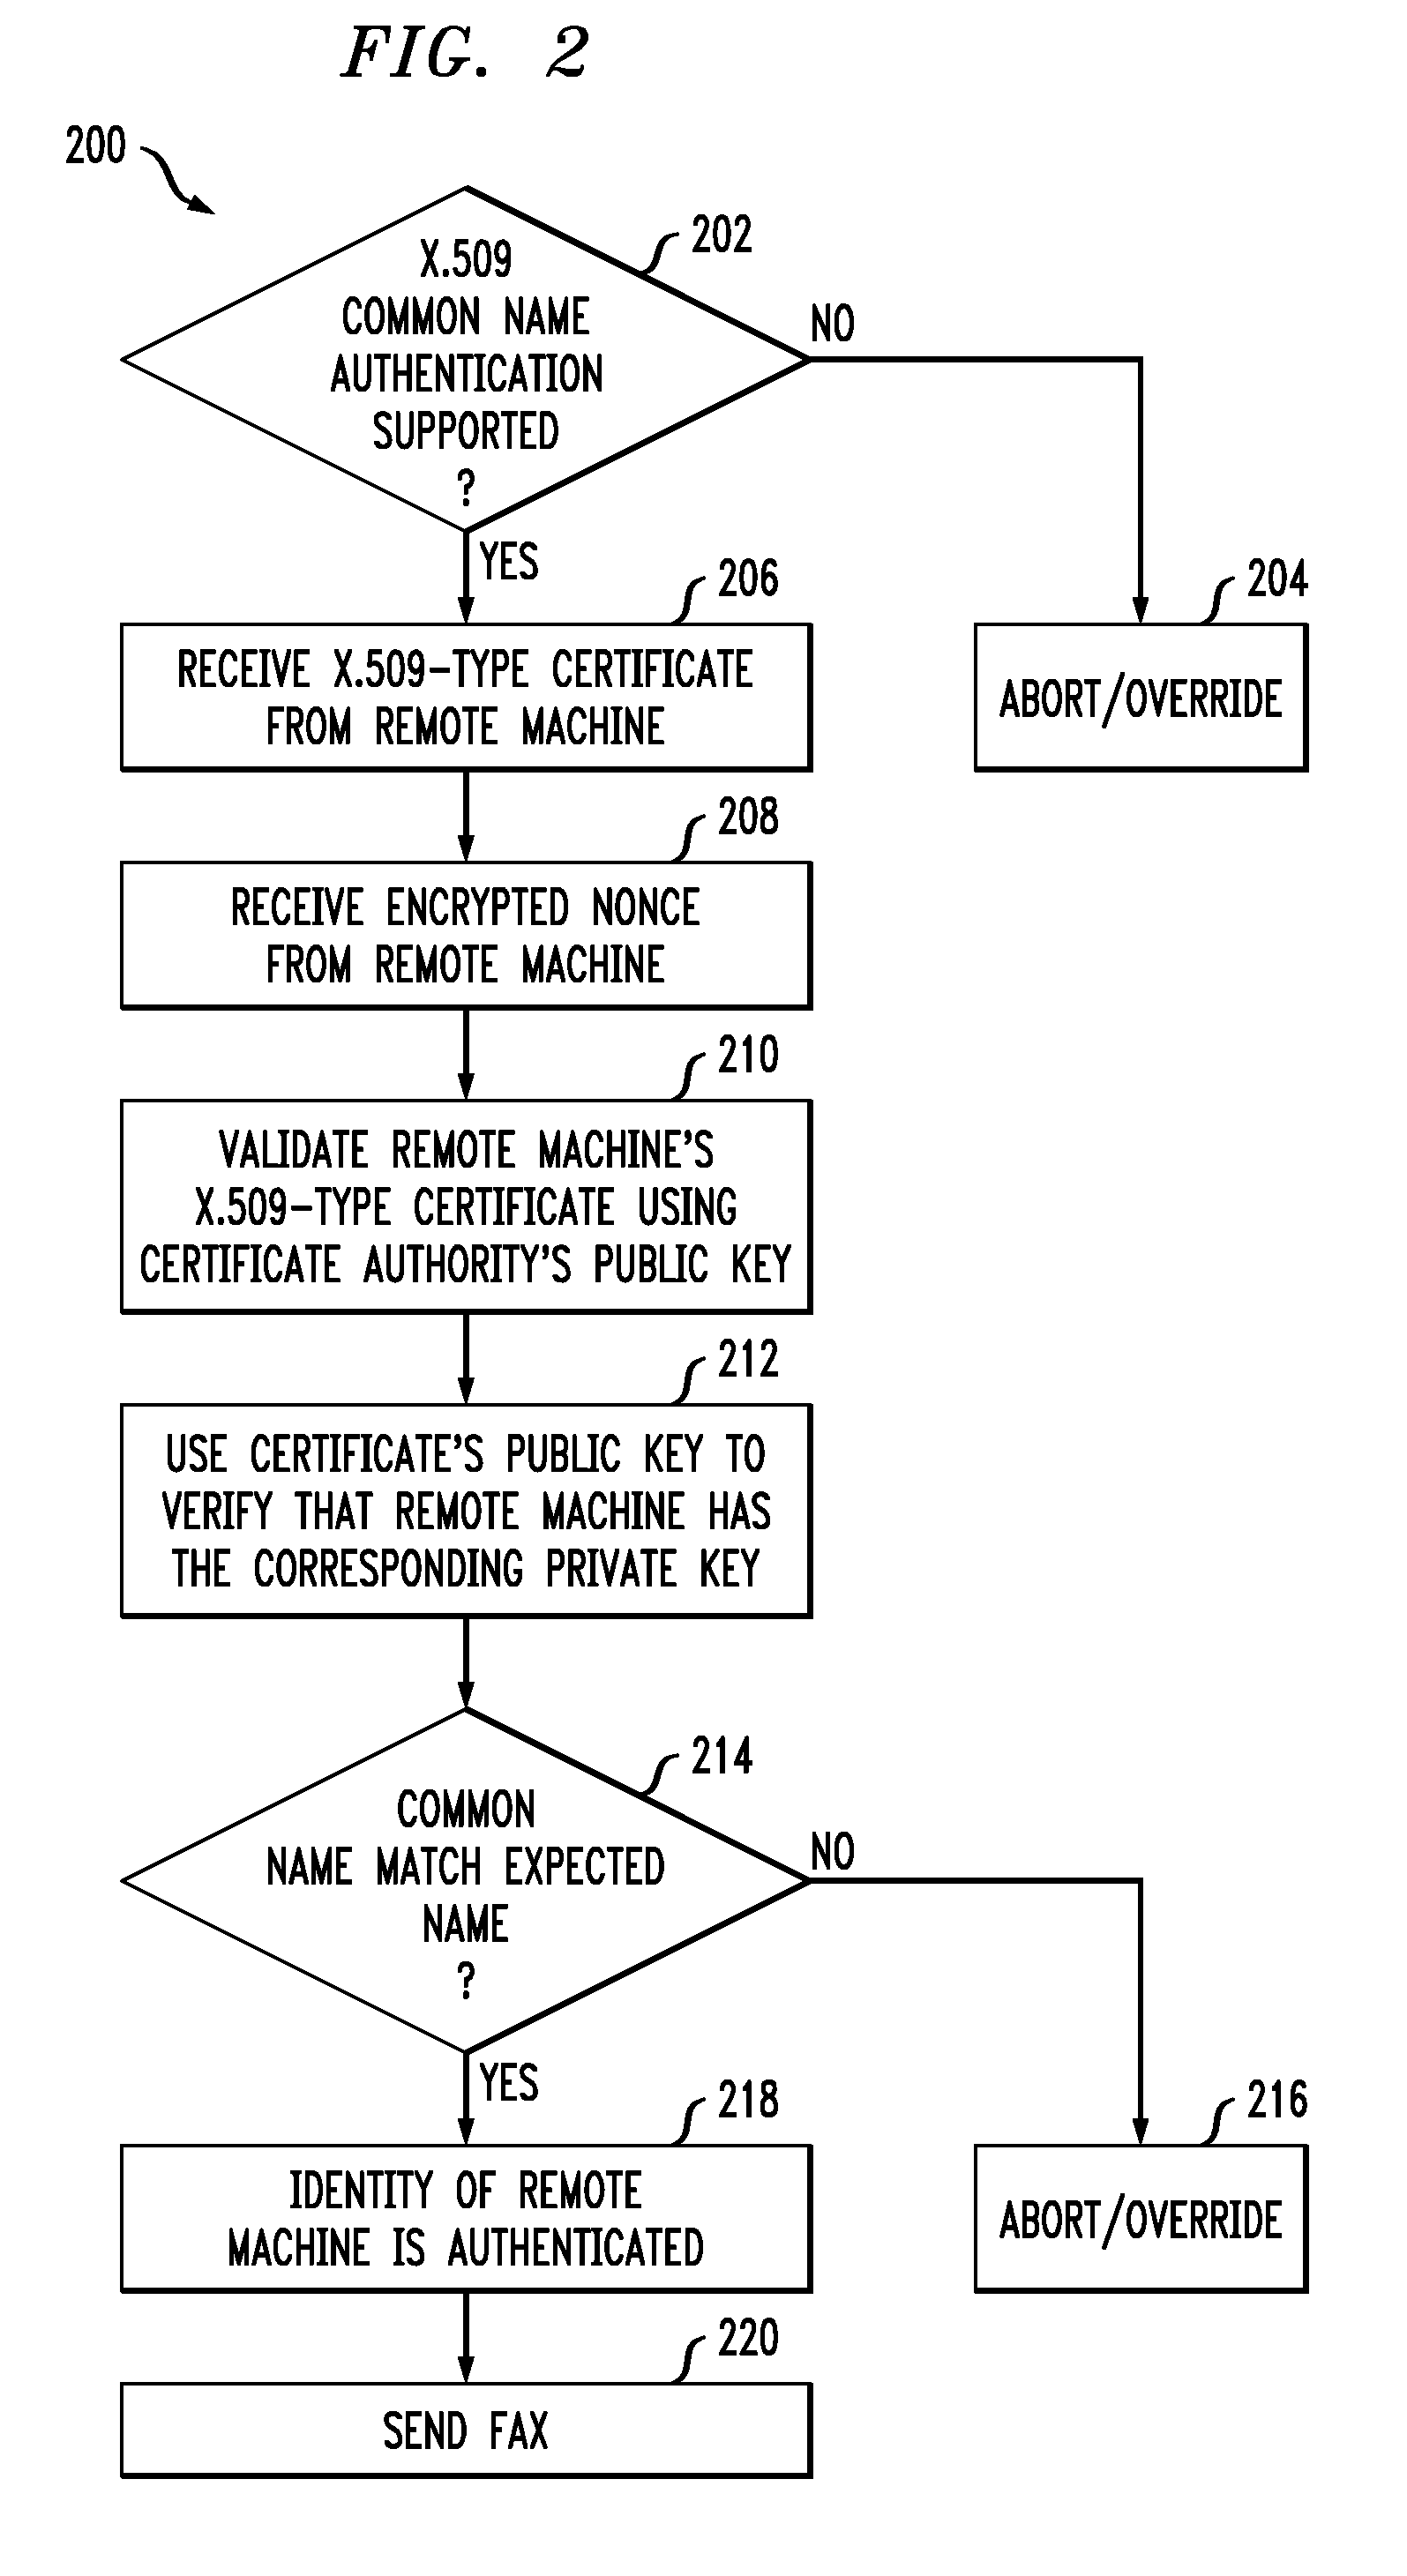 System and Method for Authenticating the Identity of a Remote Fax Machine